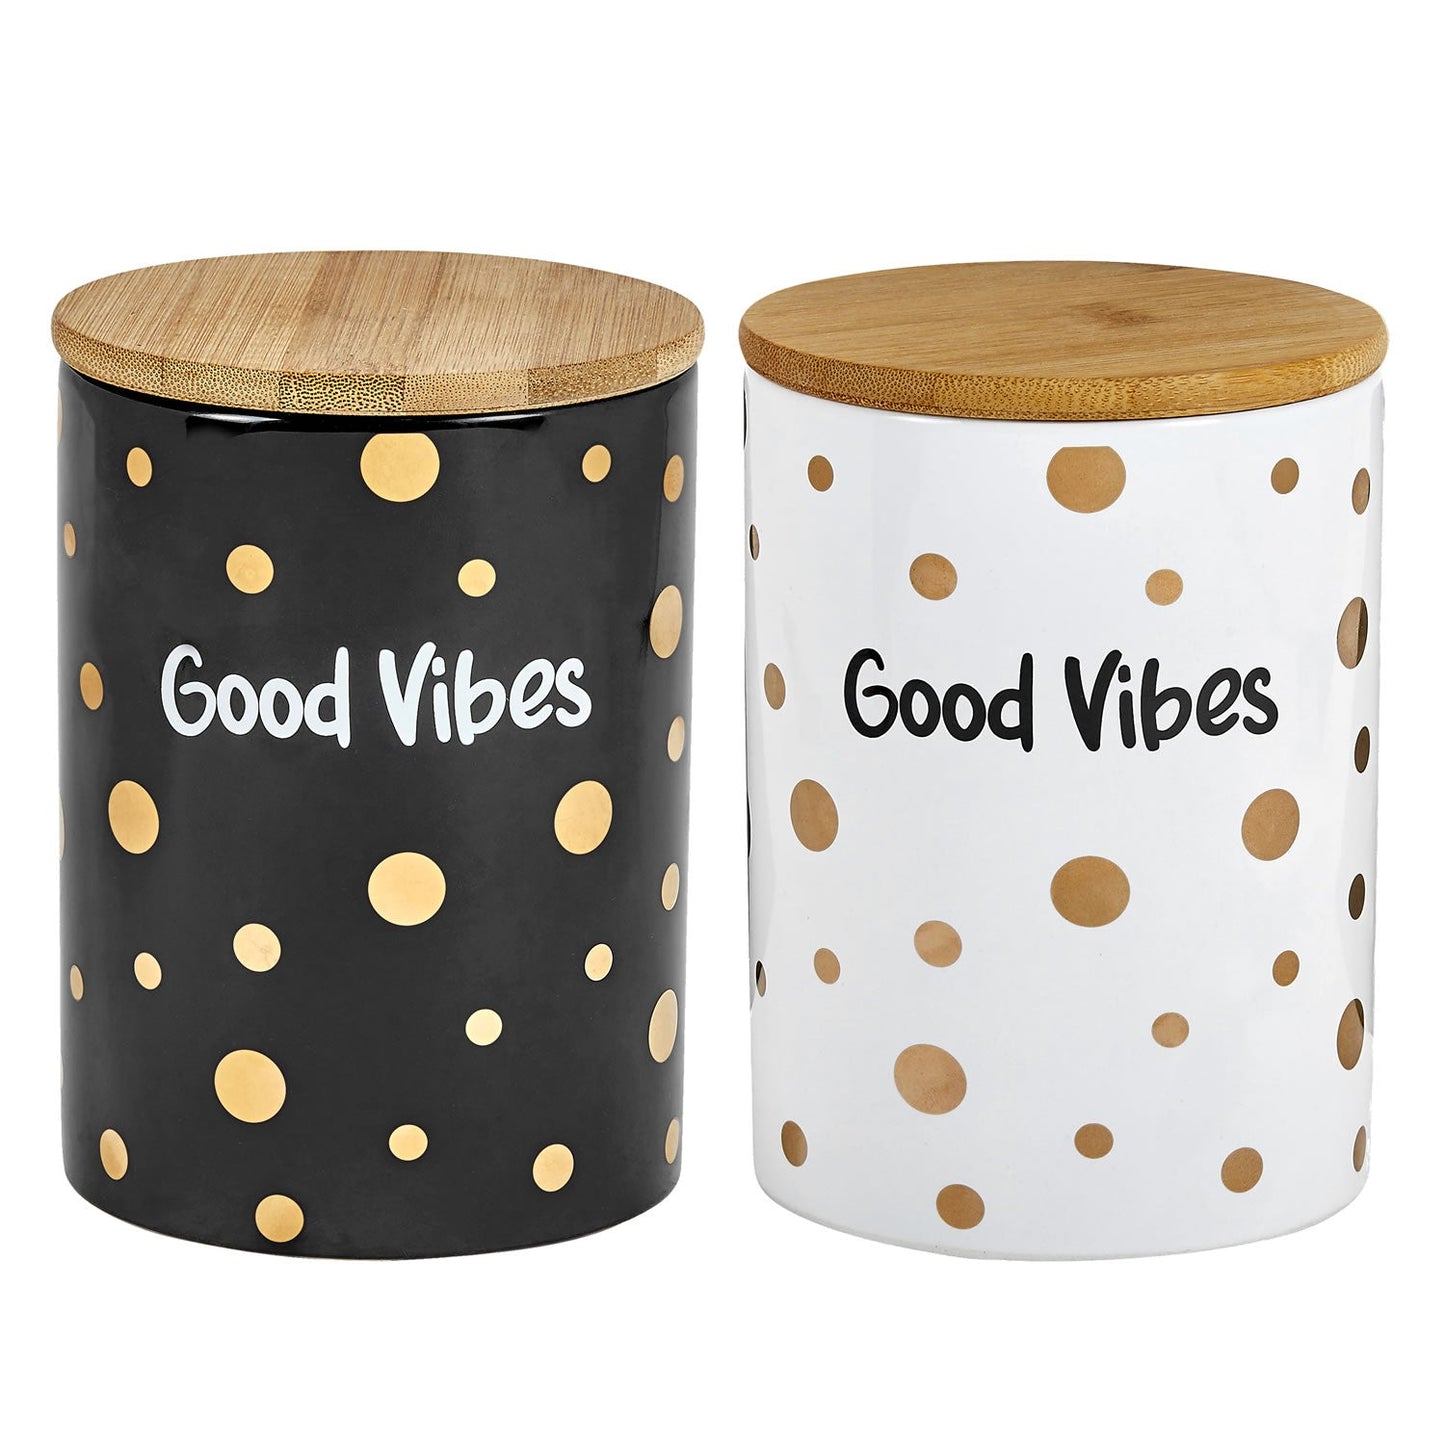 FASHIONCRAFT Deluxe Canister - Stash Jar White + Black Canister - Gold Polka Dots - Good Vibes